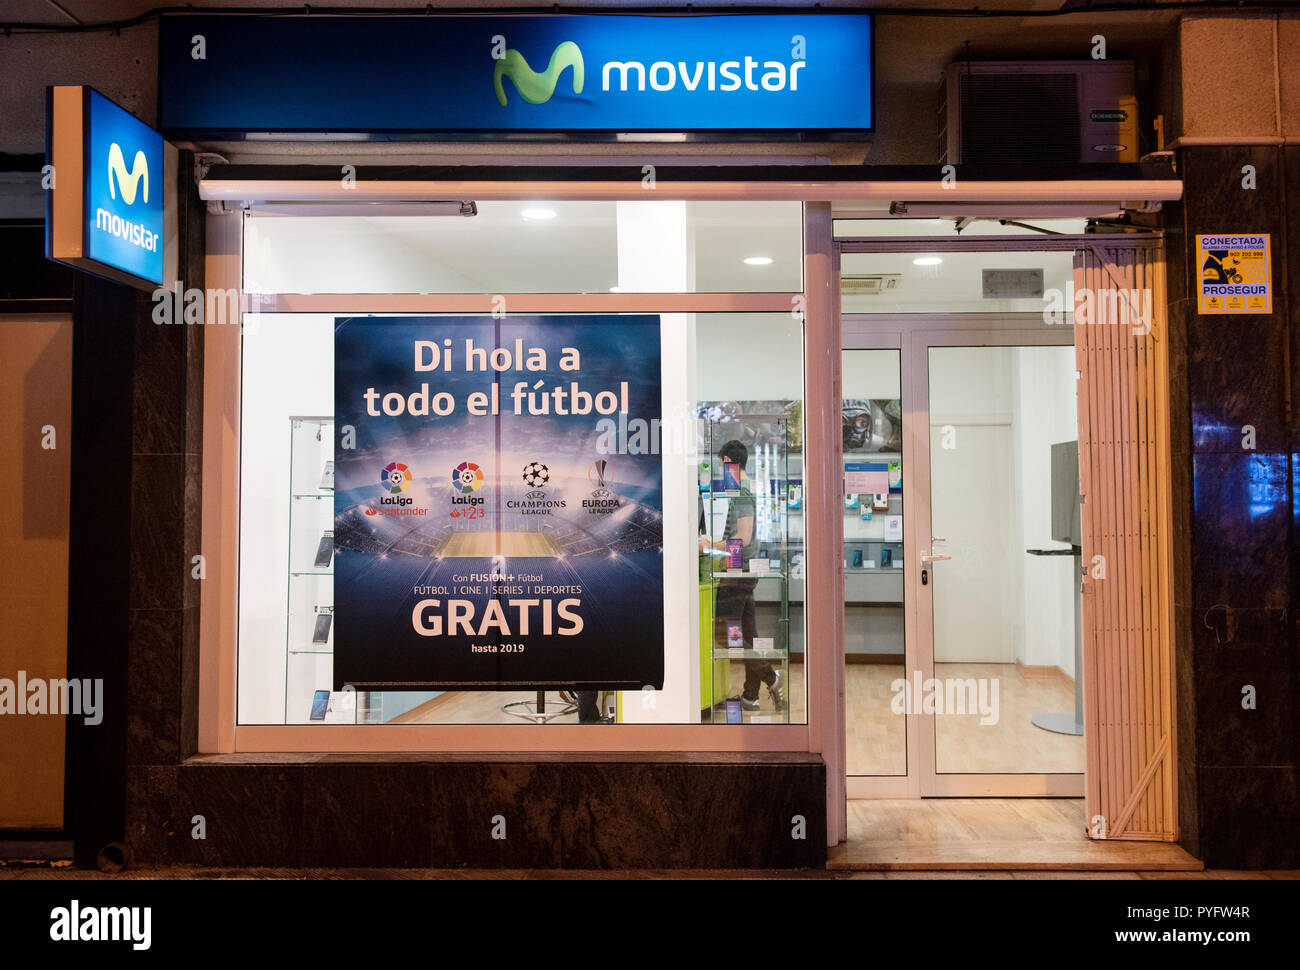 Spanish telecommunications brand owned by Telefonica and largest mobile phone operator, Movistar, store seen in Alicante, Spain. Stock Photo